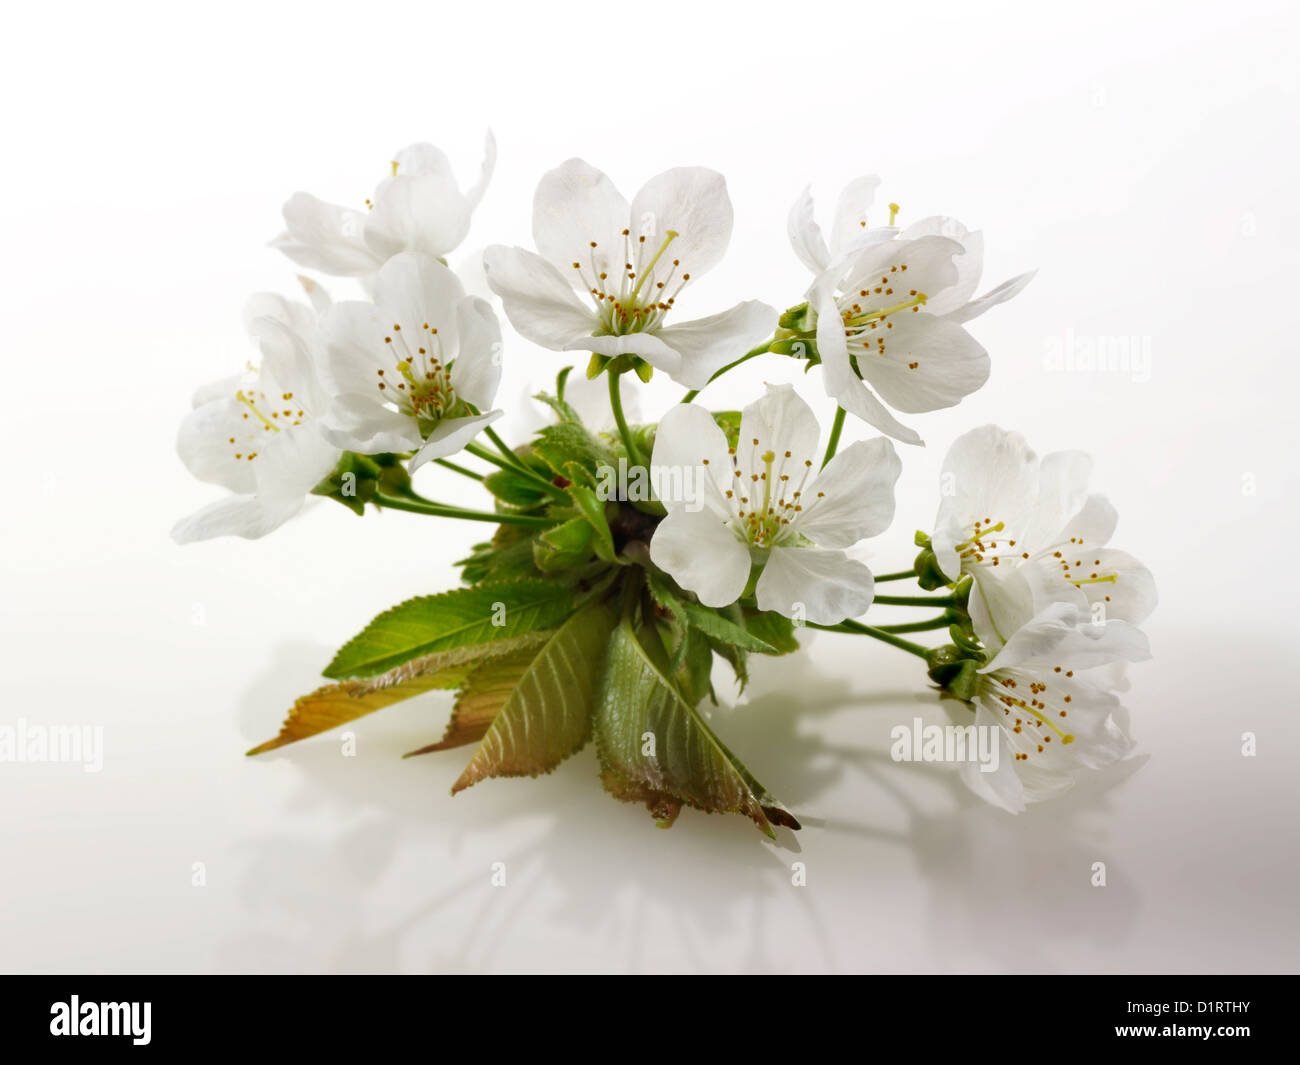 Stock Photos of close up of cherry blossom on a white background. Stock Photo